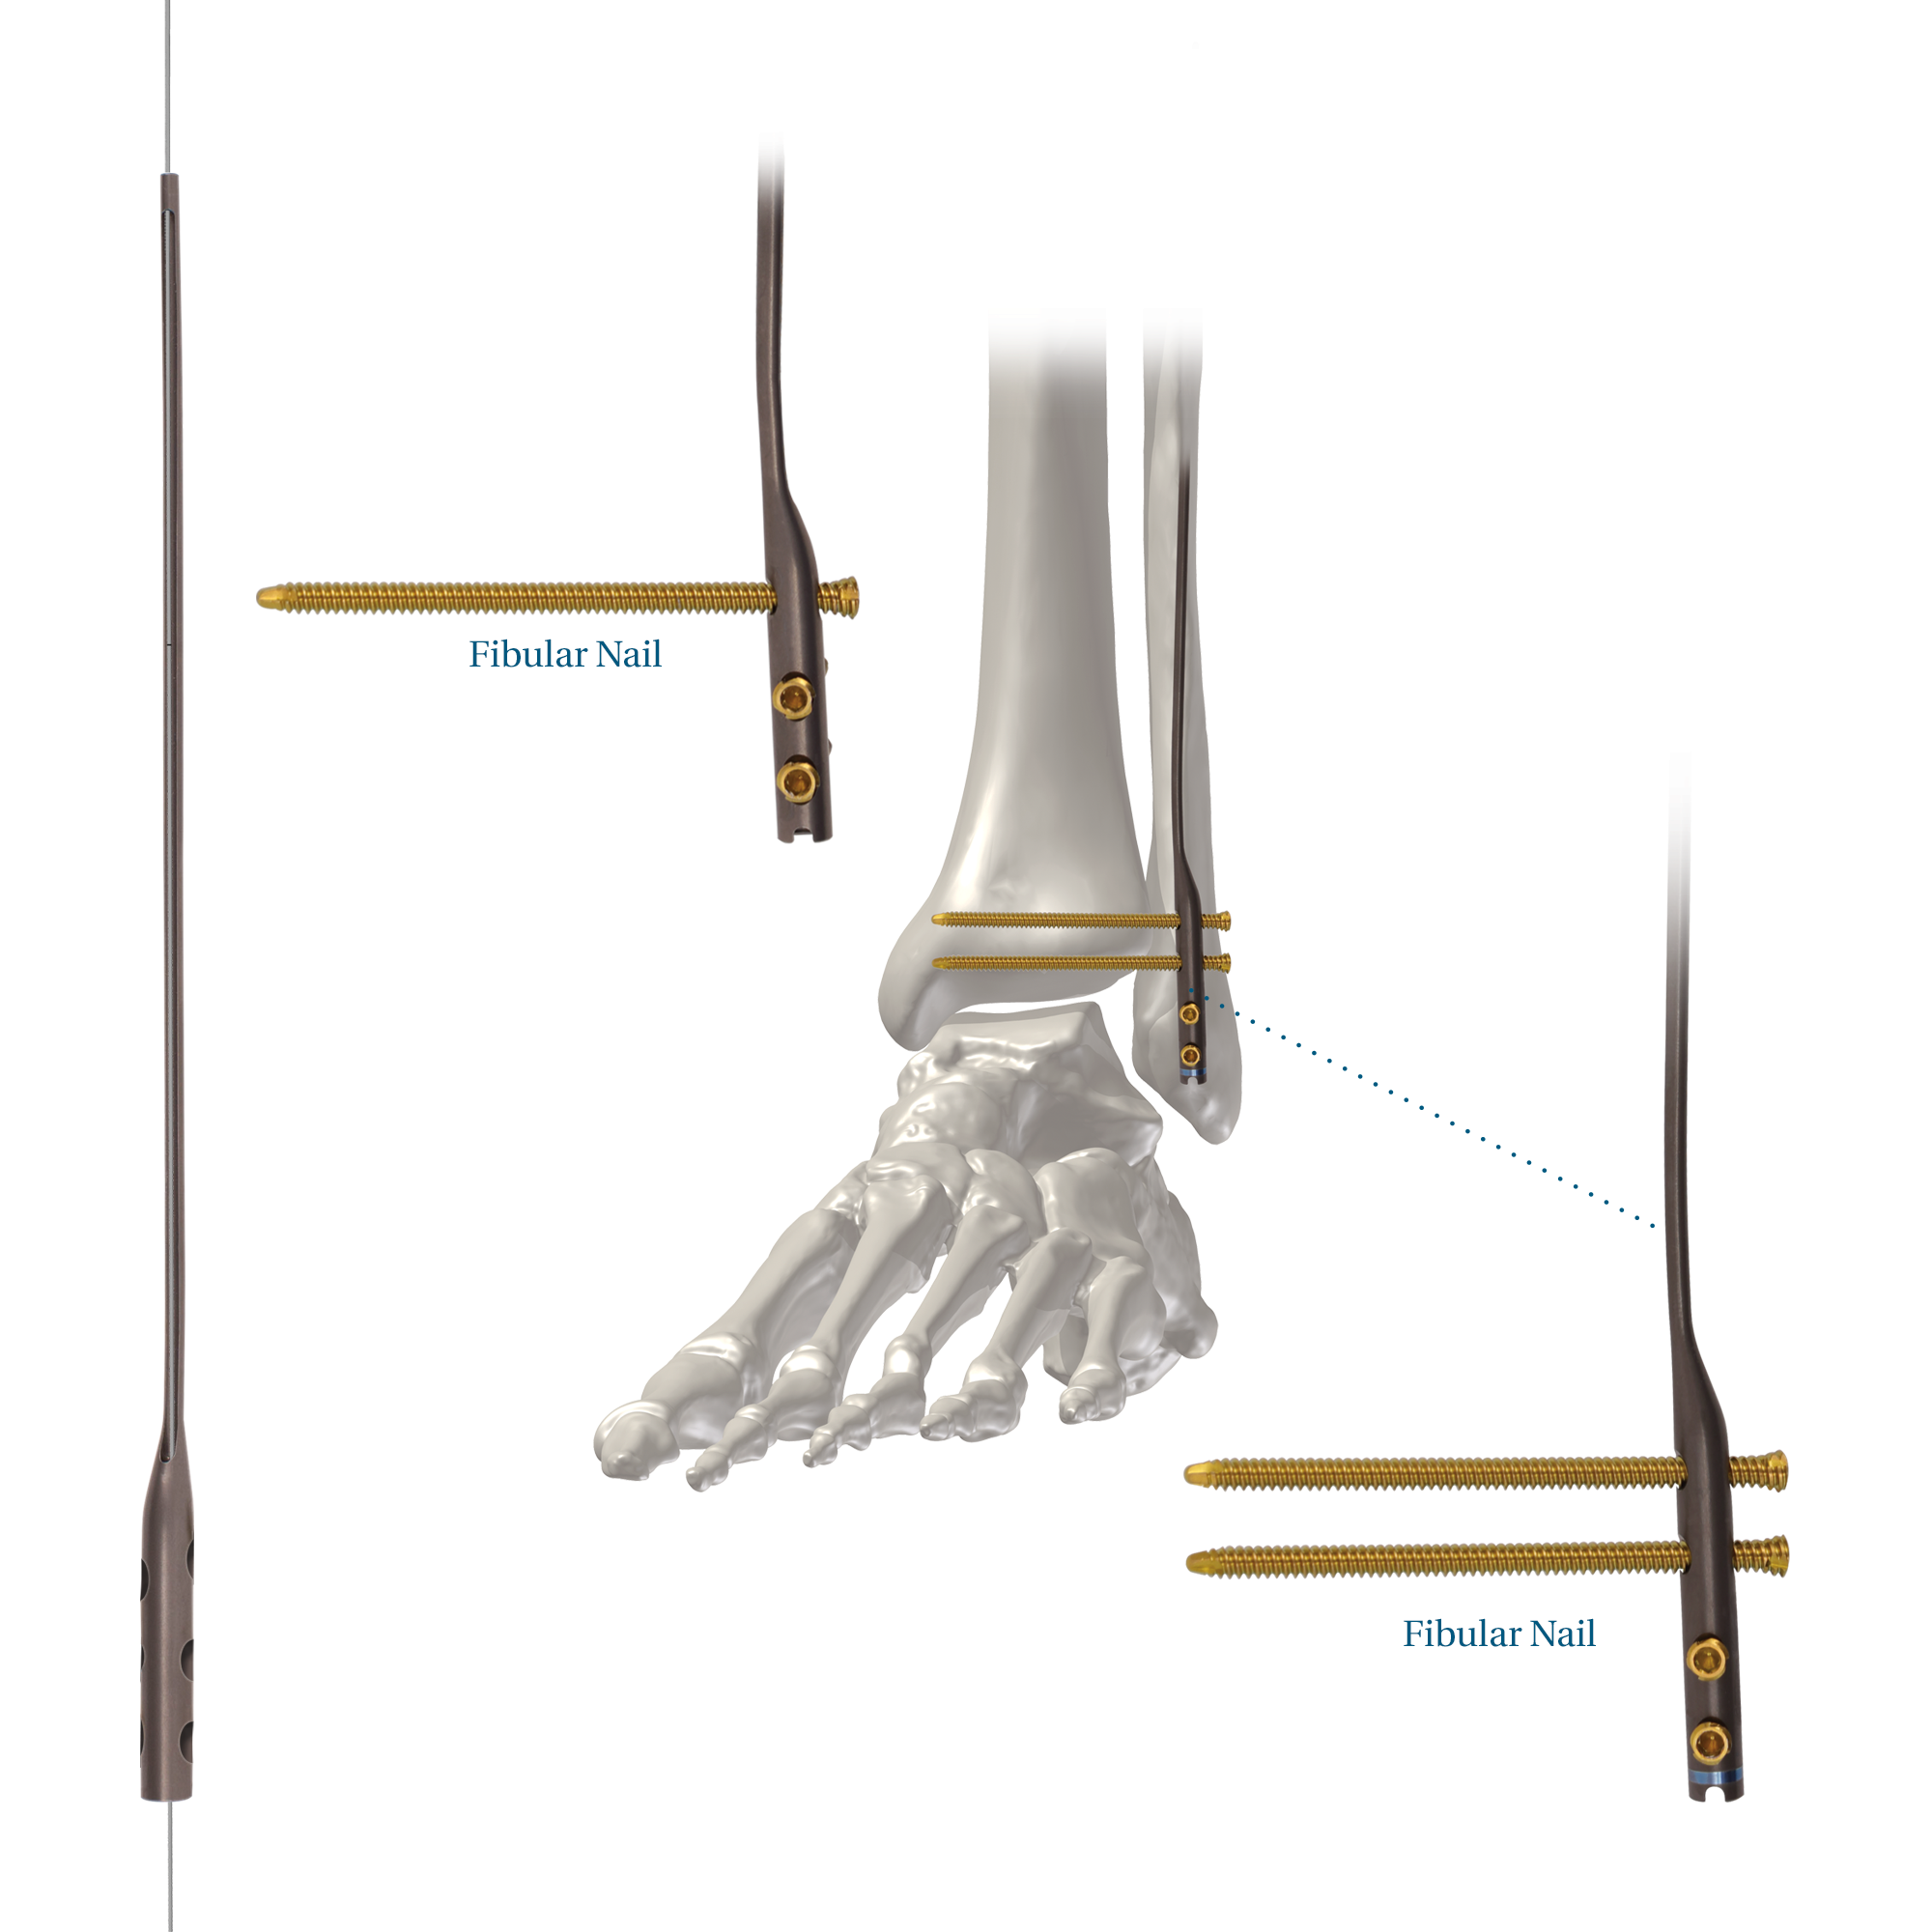 Treatment of the failed intramedullary fixation using long cephalomedullary  nail for atypical subtrochanteric femoral fractures